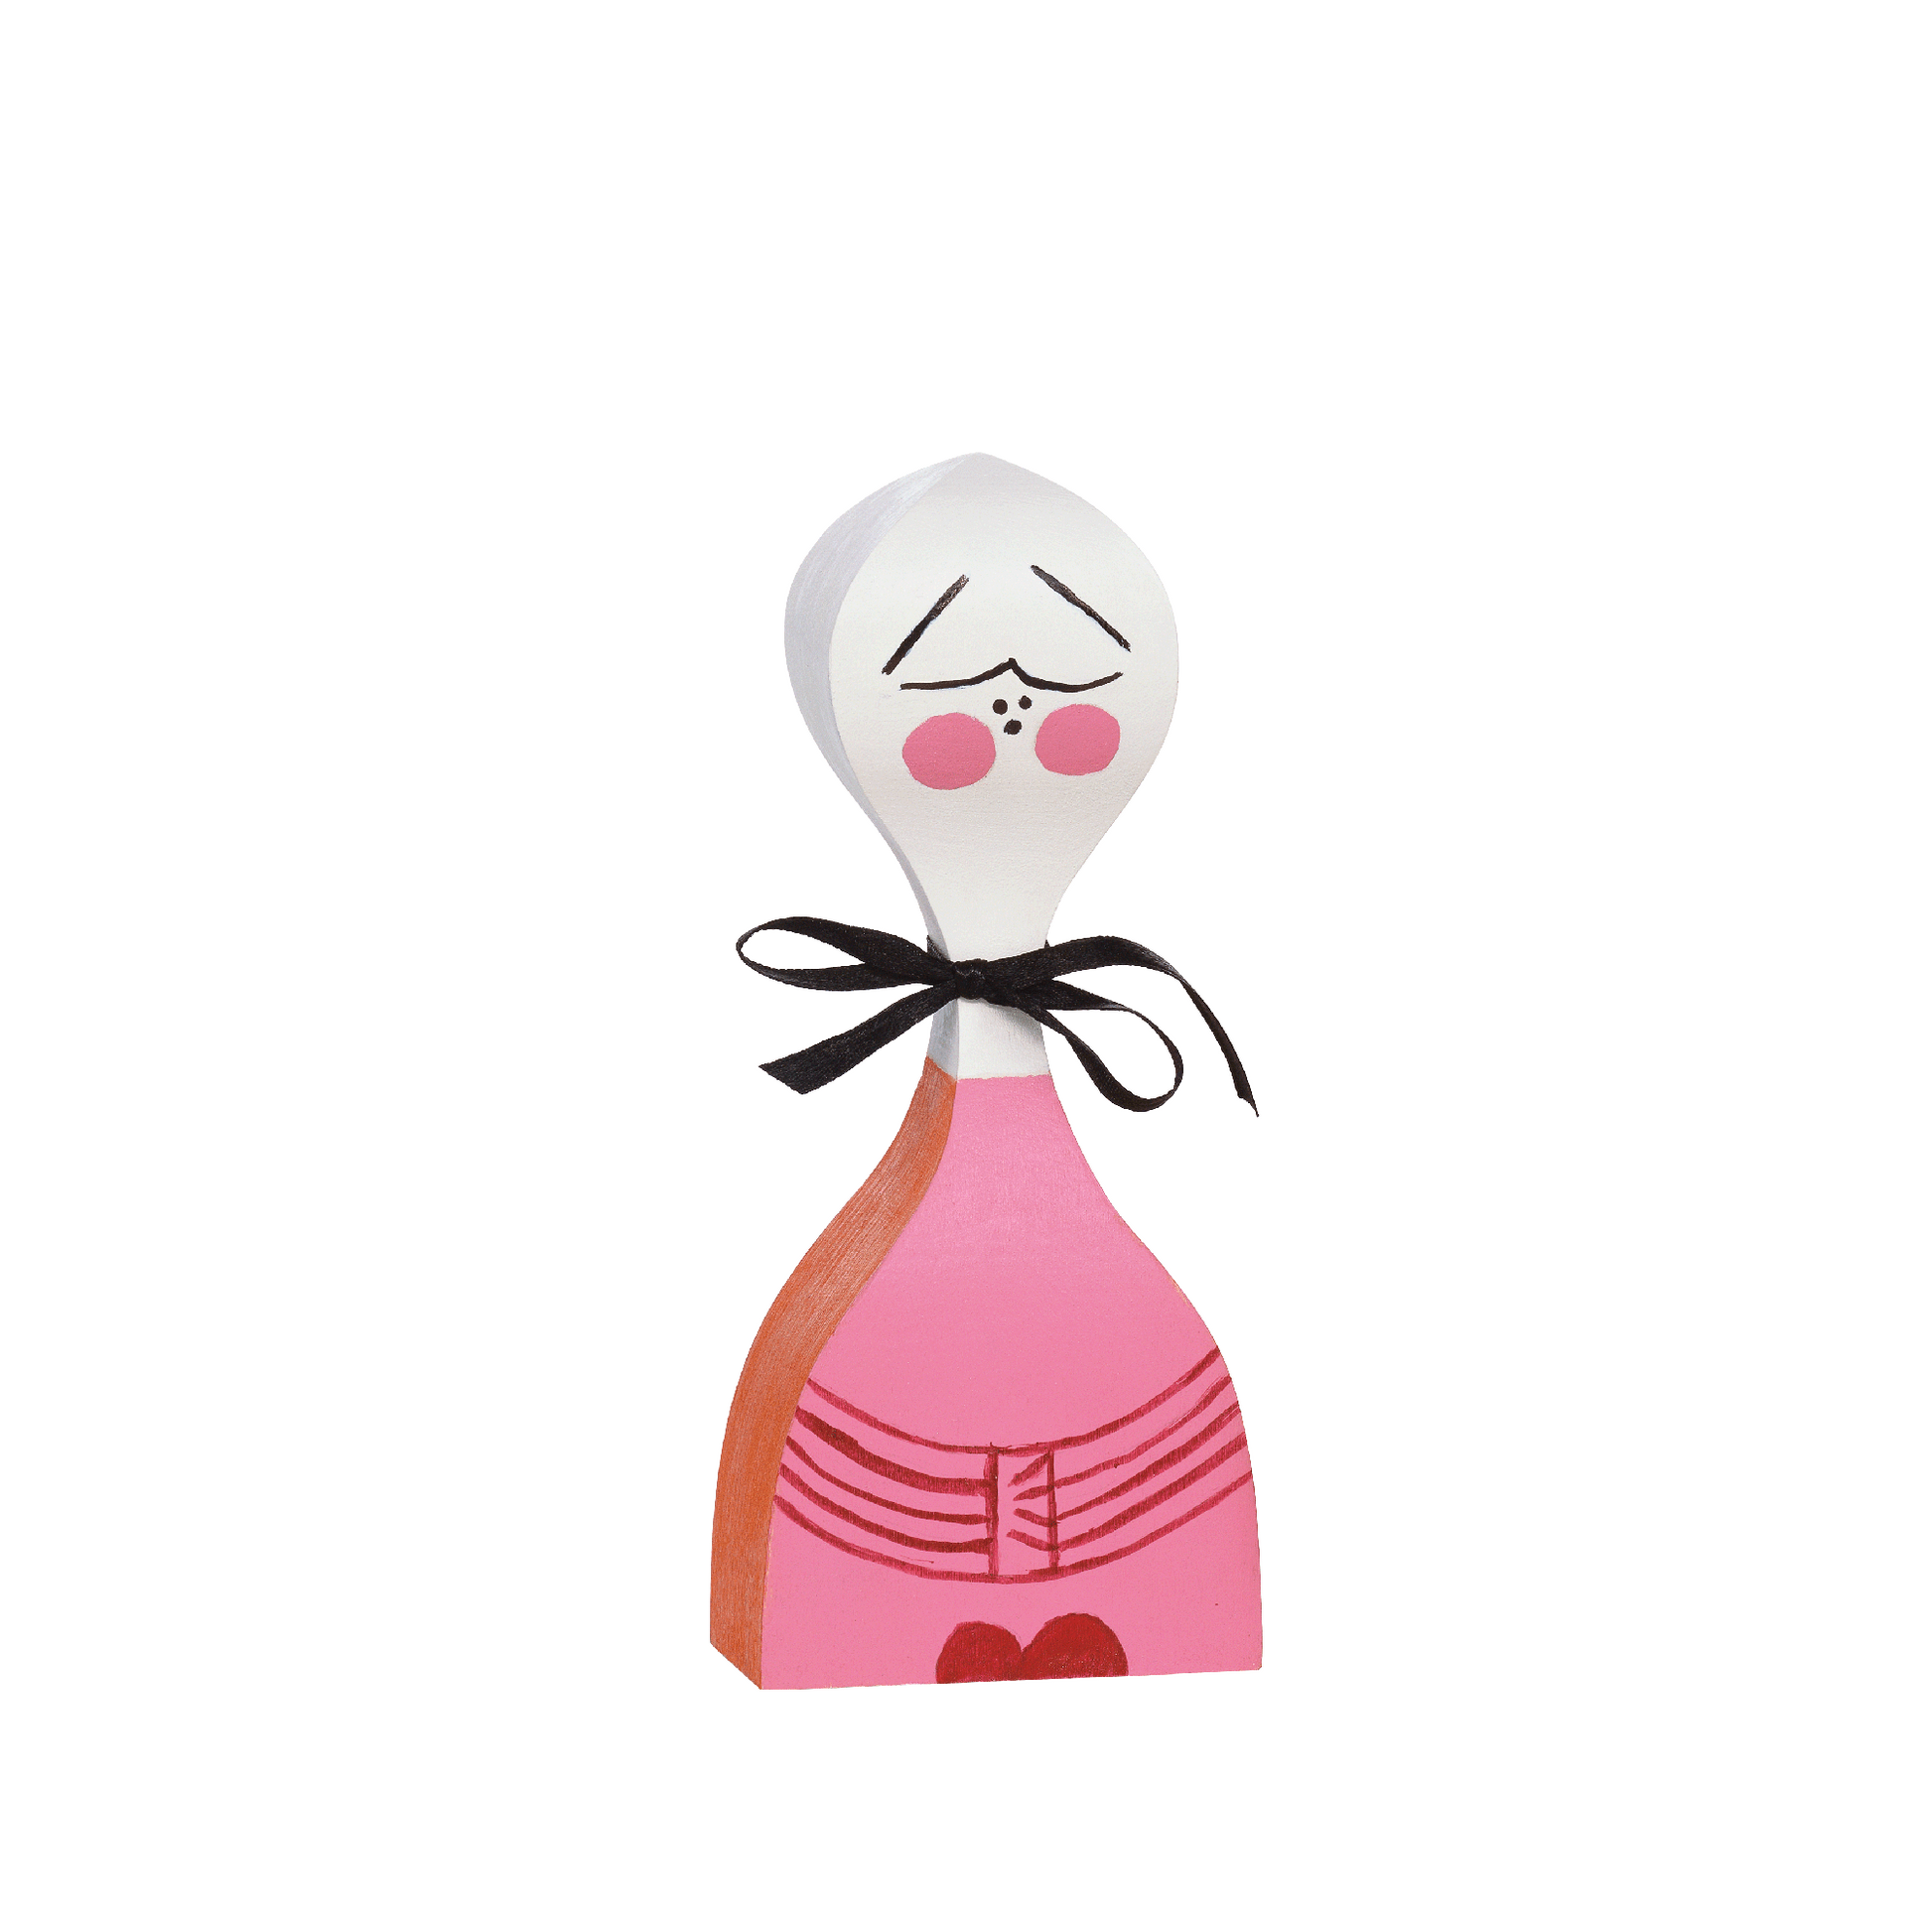 Wooden Doll No.2 by Vitra #